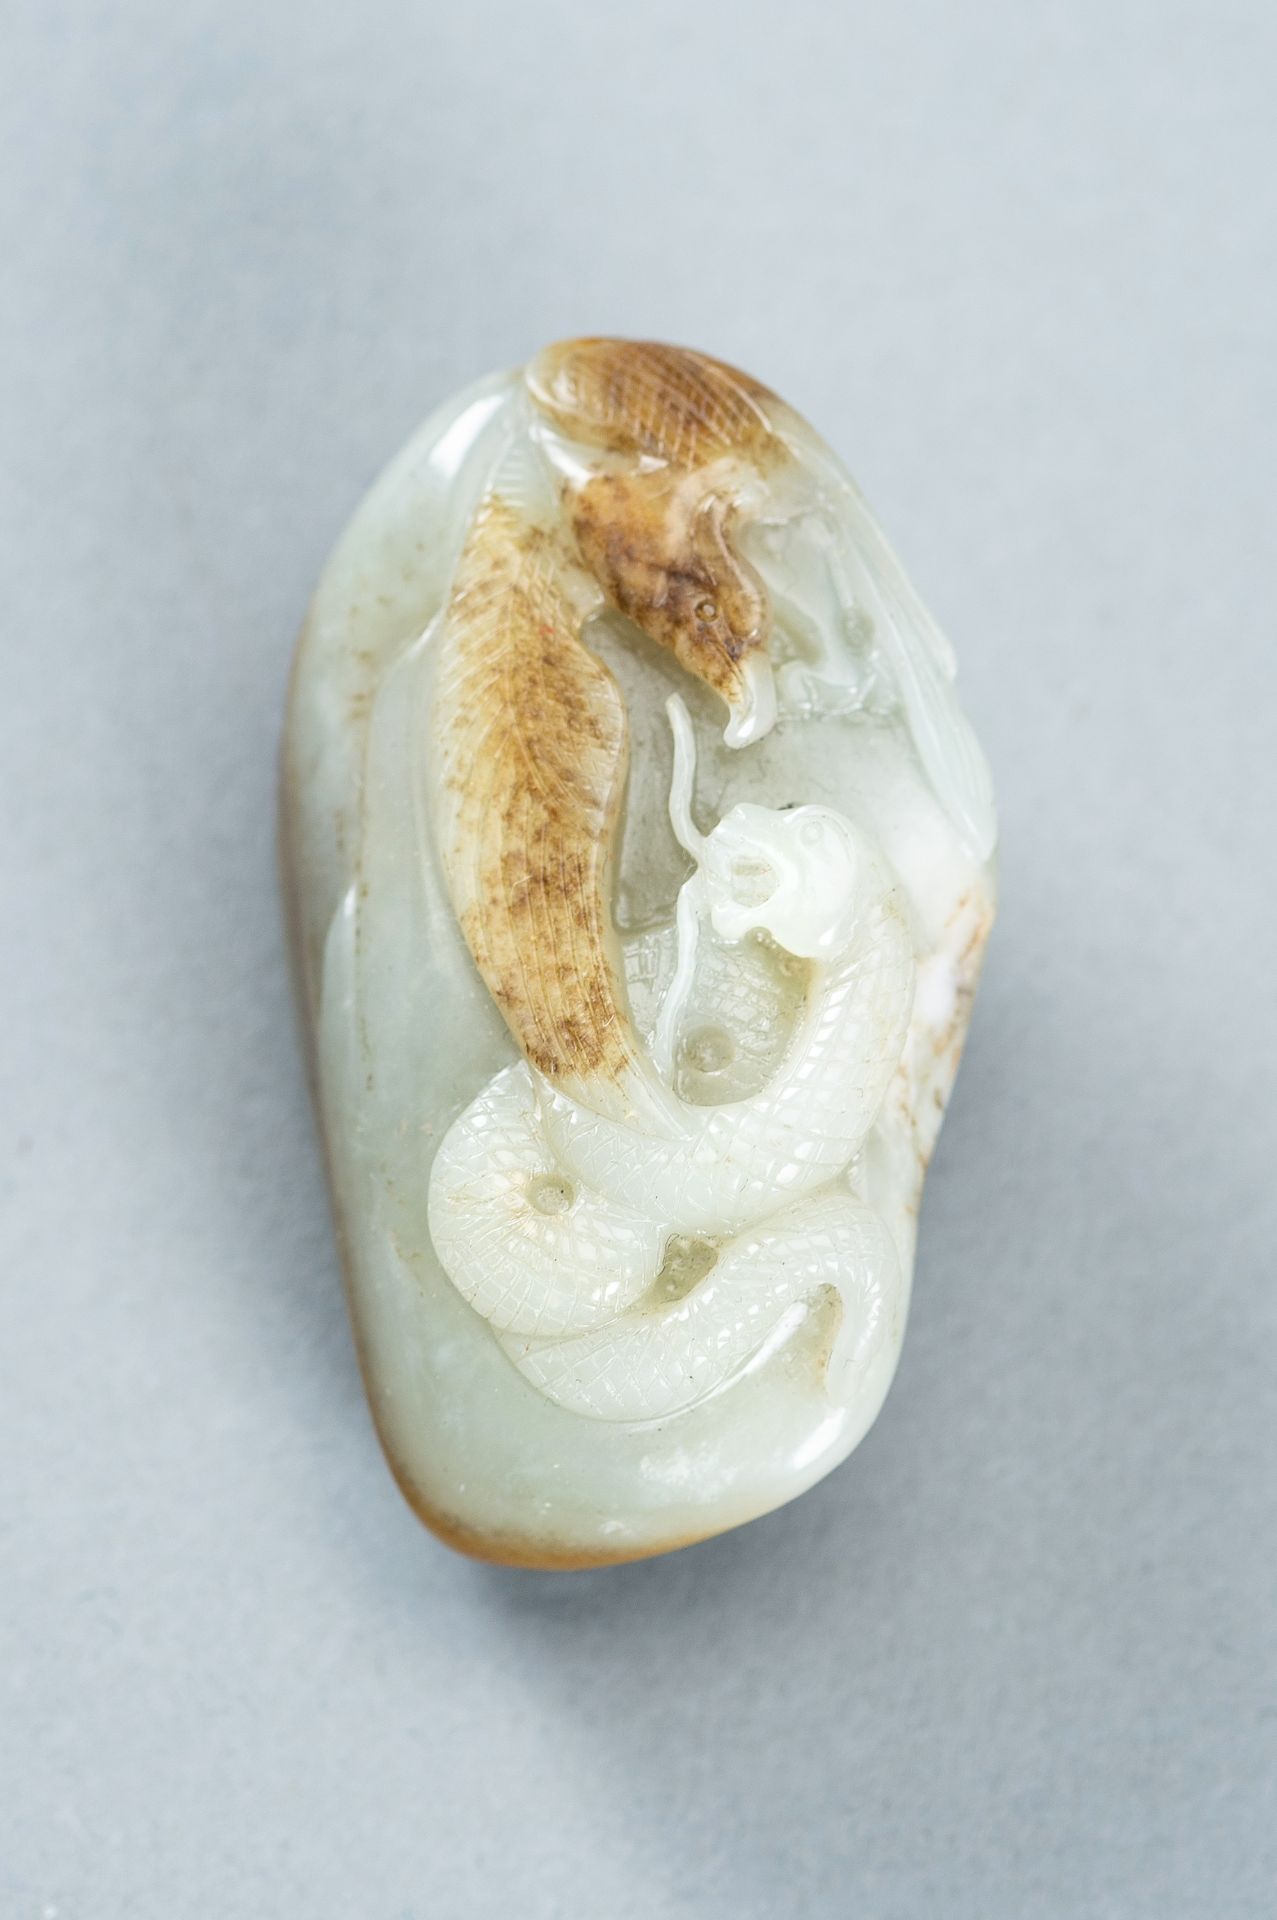 A CELADON AND RUSSET JADE 'EAGLE AND SNAKE' PENDANT, c. 1920s